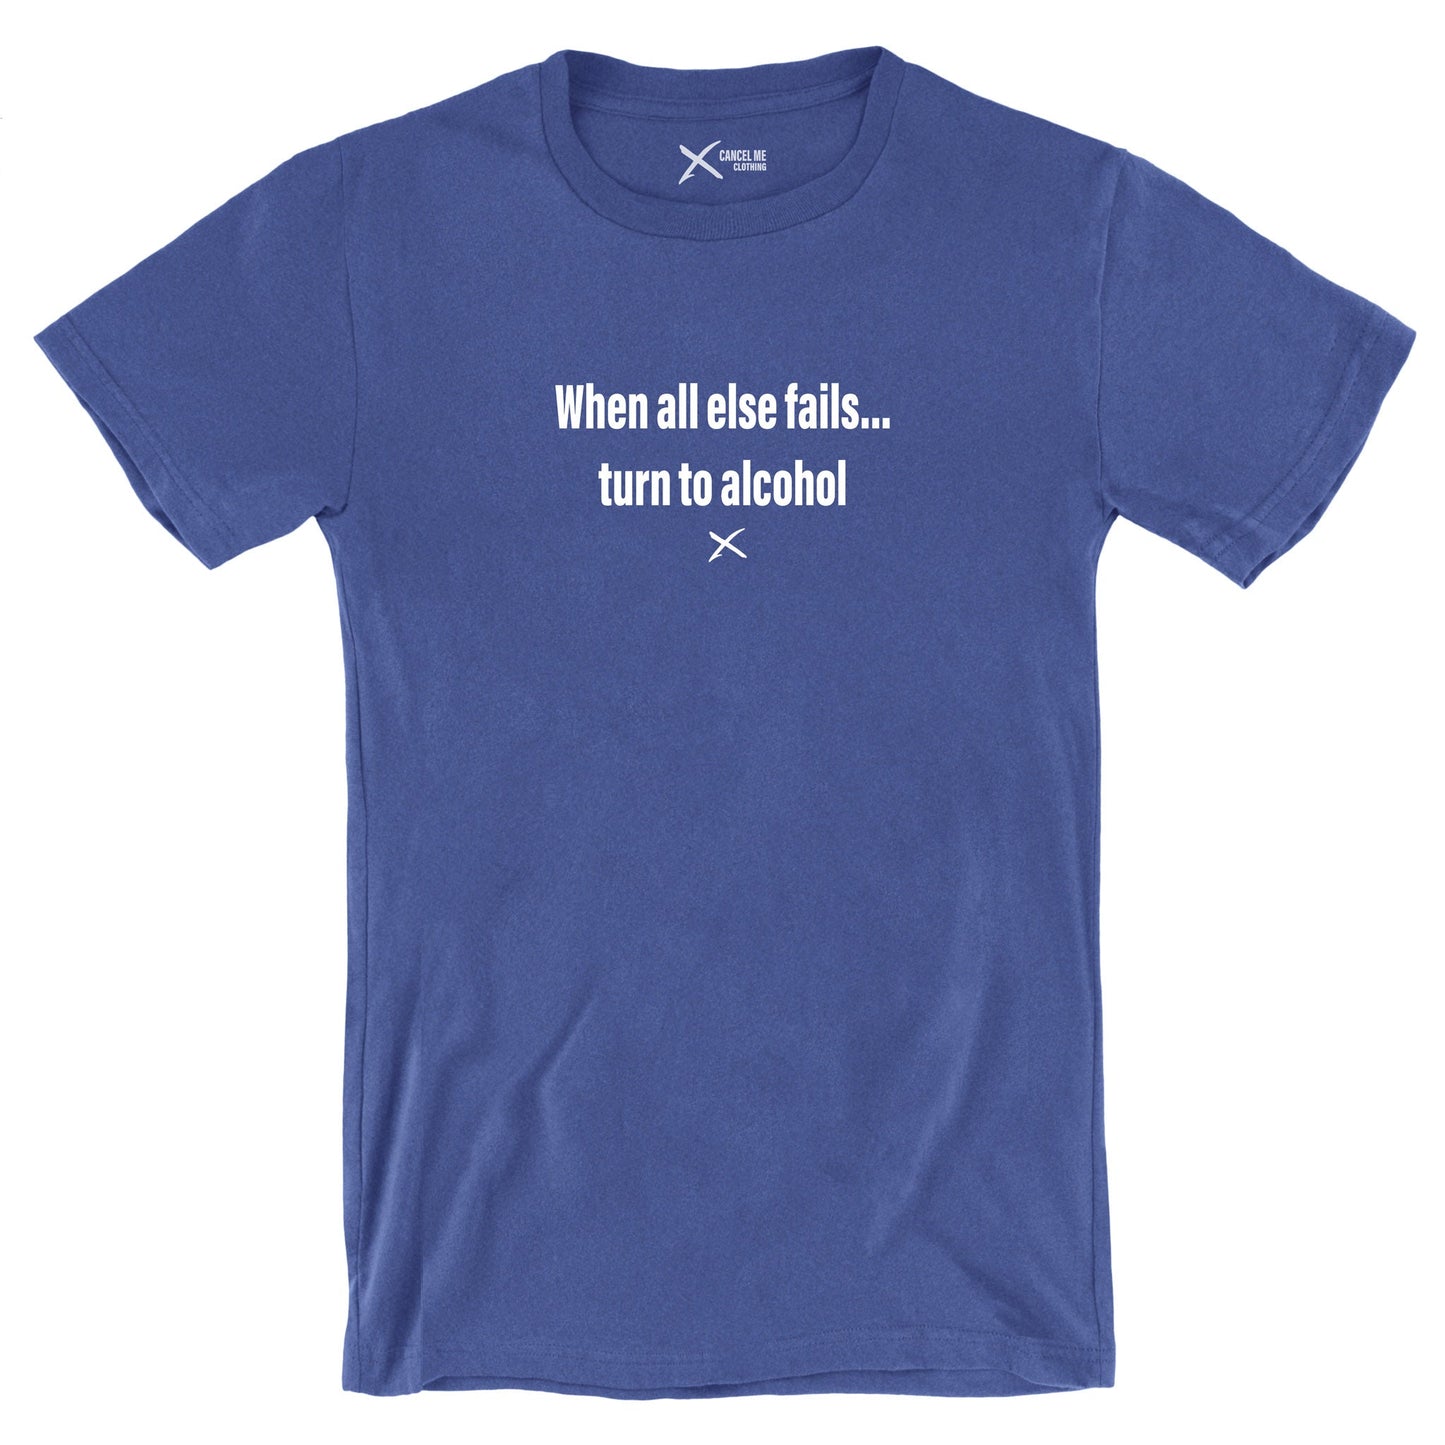 When all else fails... turn to alcohol - Shirt